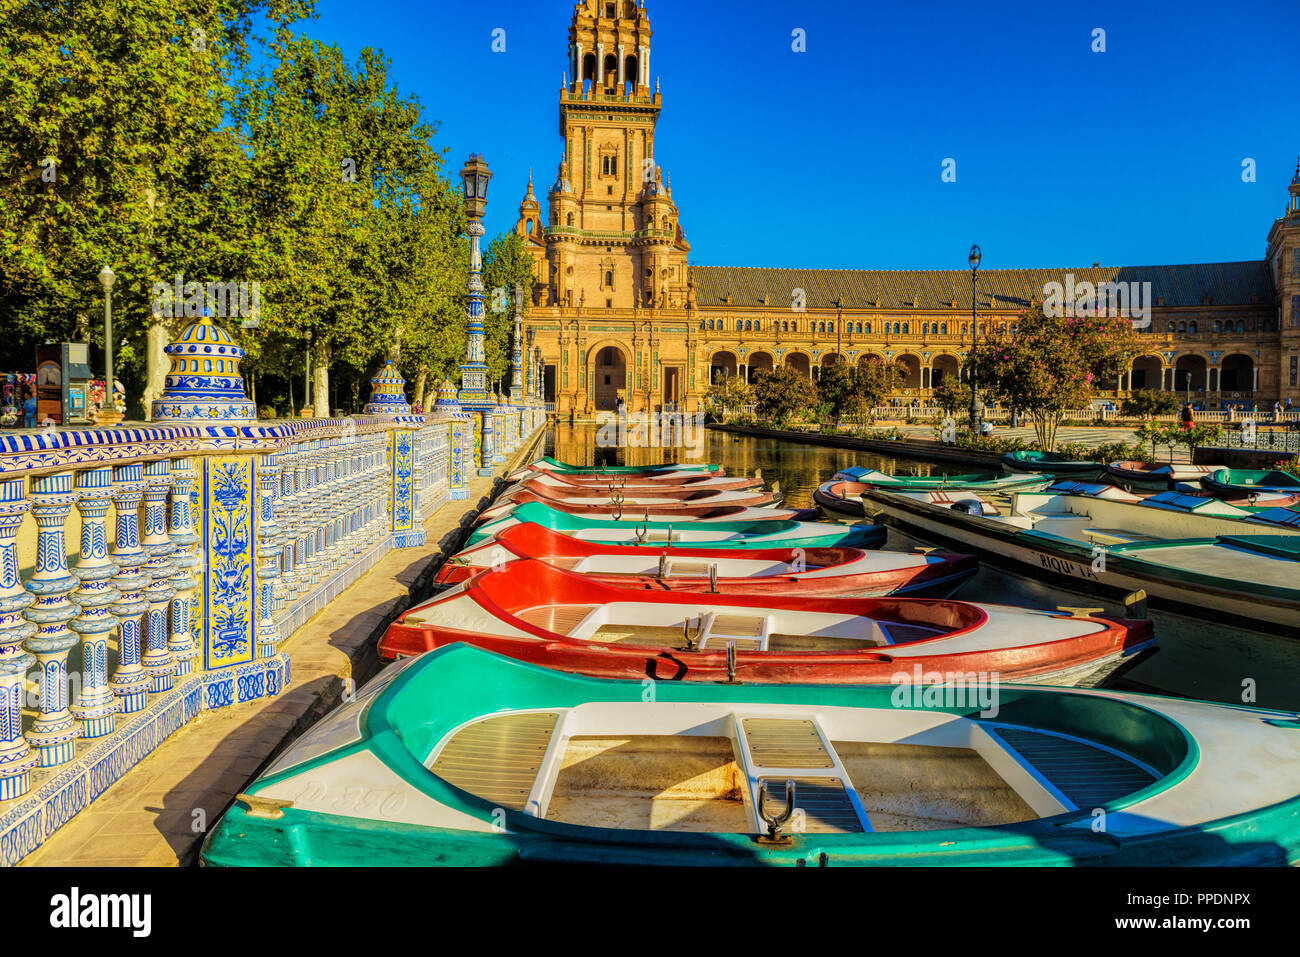 The Plaza de Espana, Seville, Spain built for the Ibero-American Exposition of 1929. It is a landmark example of the Renaissance Revival style in Span Stock Photo